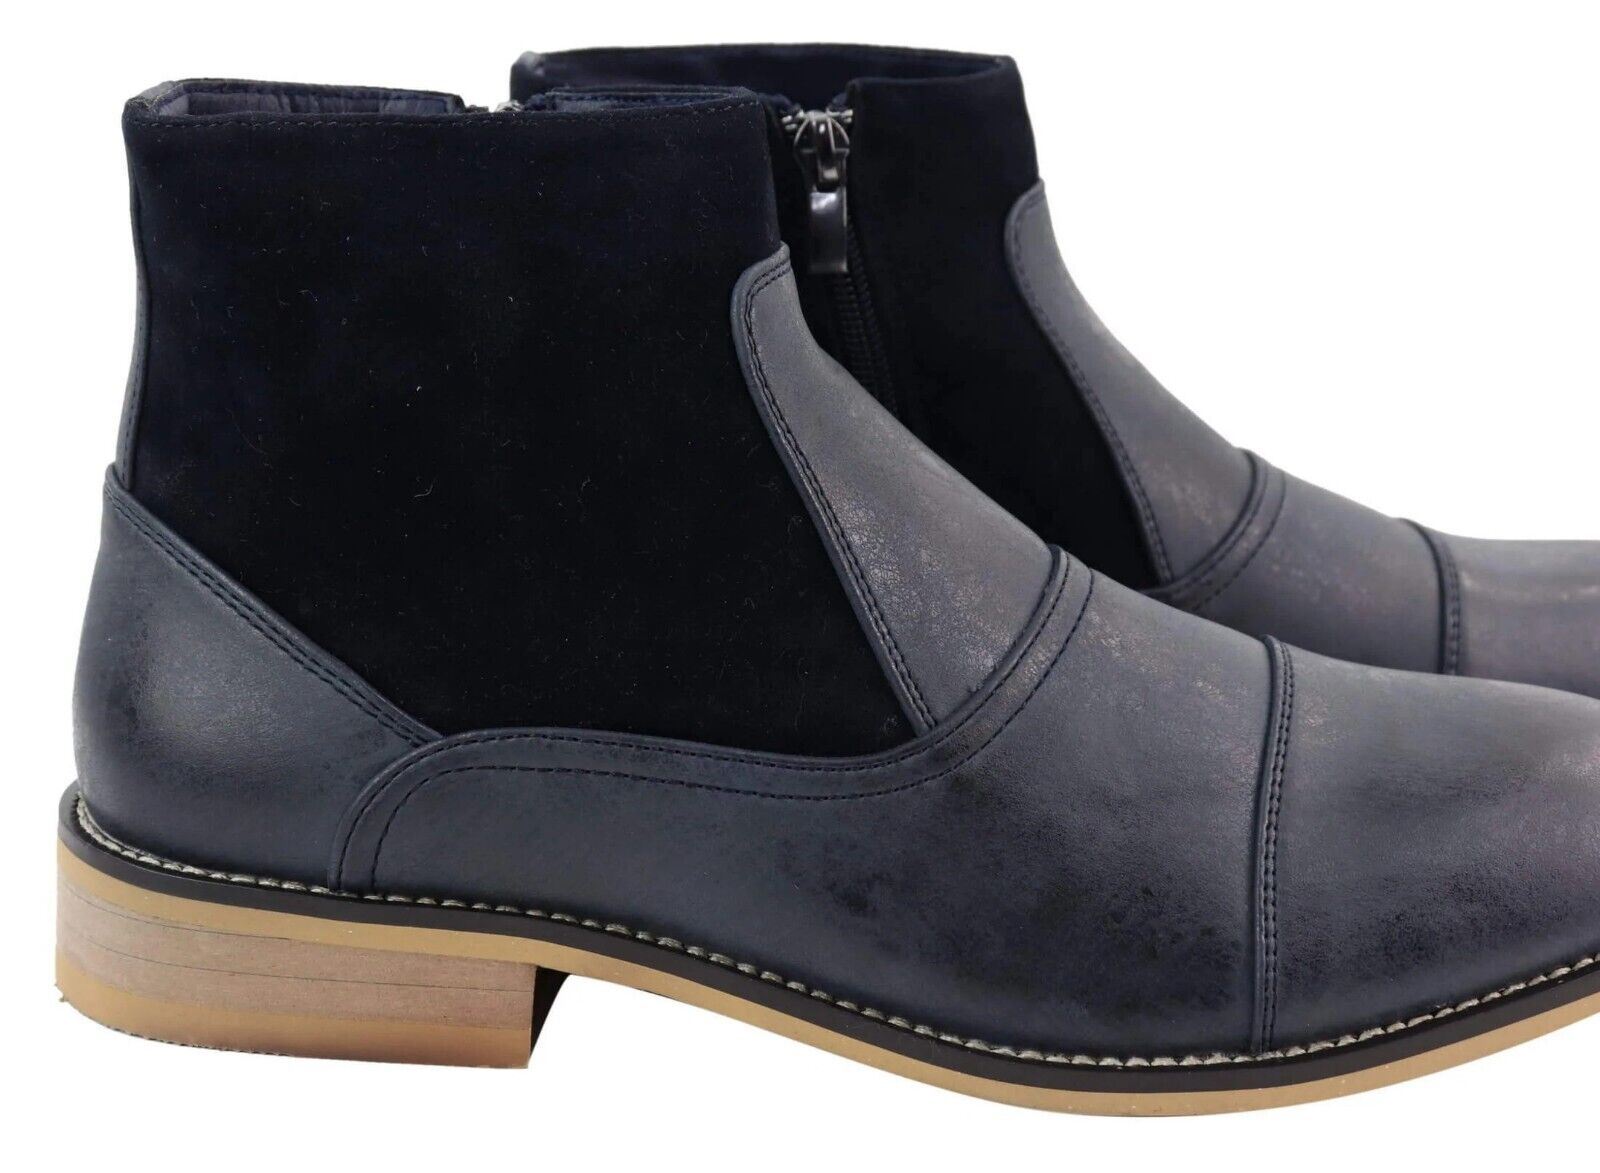 Mens Navy Leather Suede Zip Up Chelsea Boots - Upperclass Fashions 